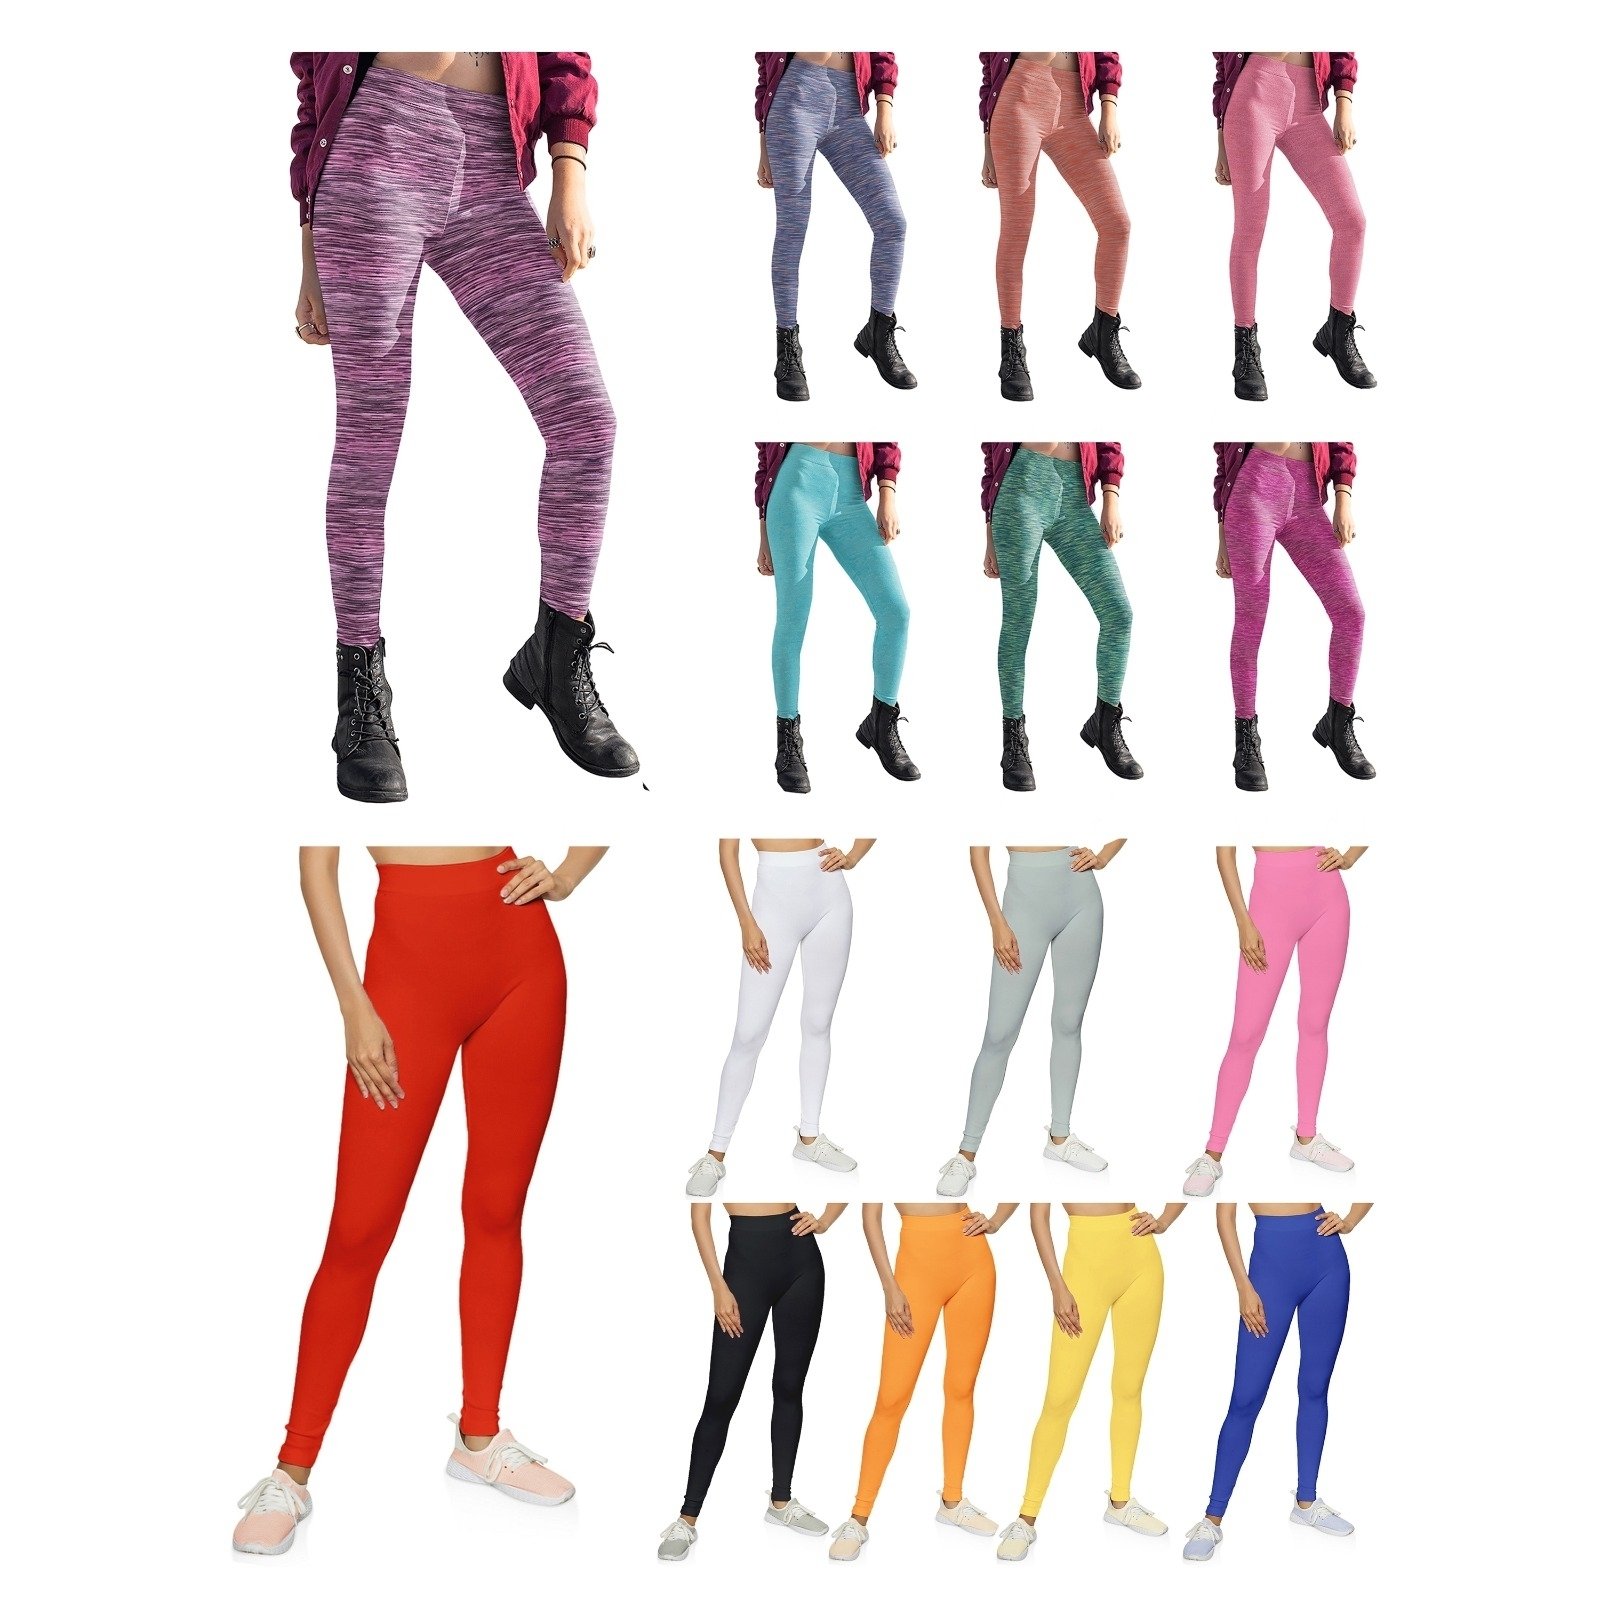 2-Pack: Women's Ultra-Soft Yoga Workout Leggings - Solid, Small/Medium